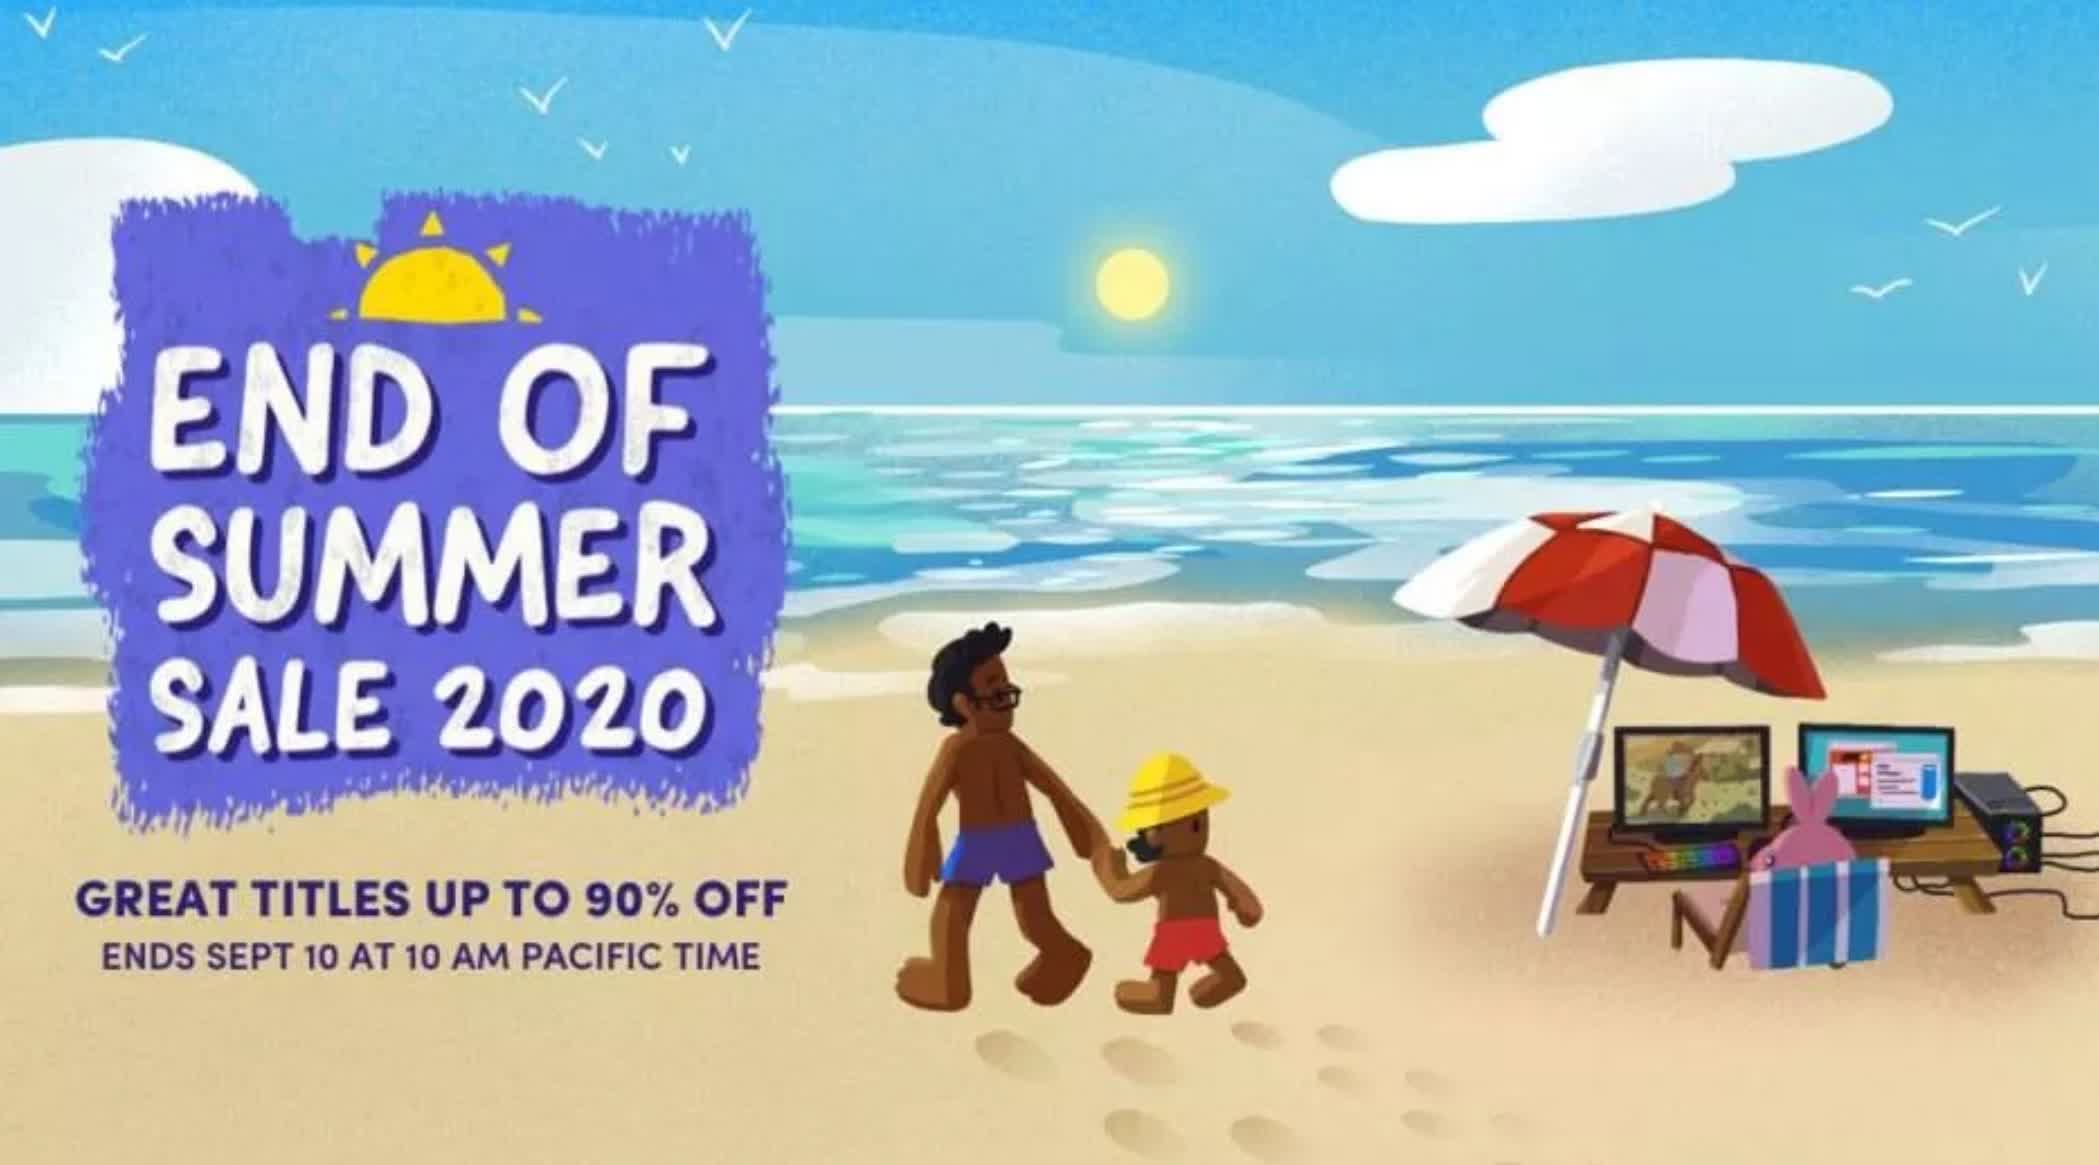 The Humble Bundle Store's End of Summer sale is offering up to 90% off top titles